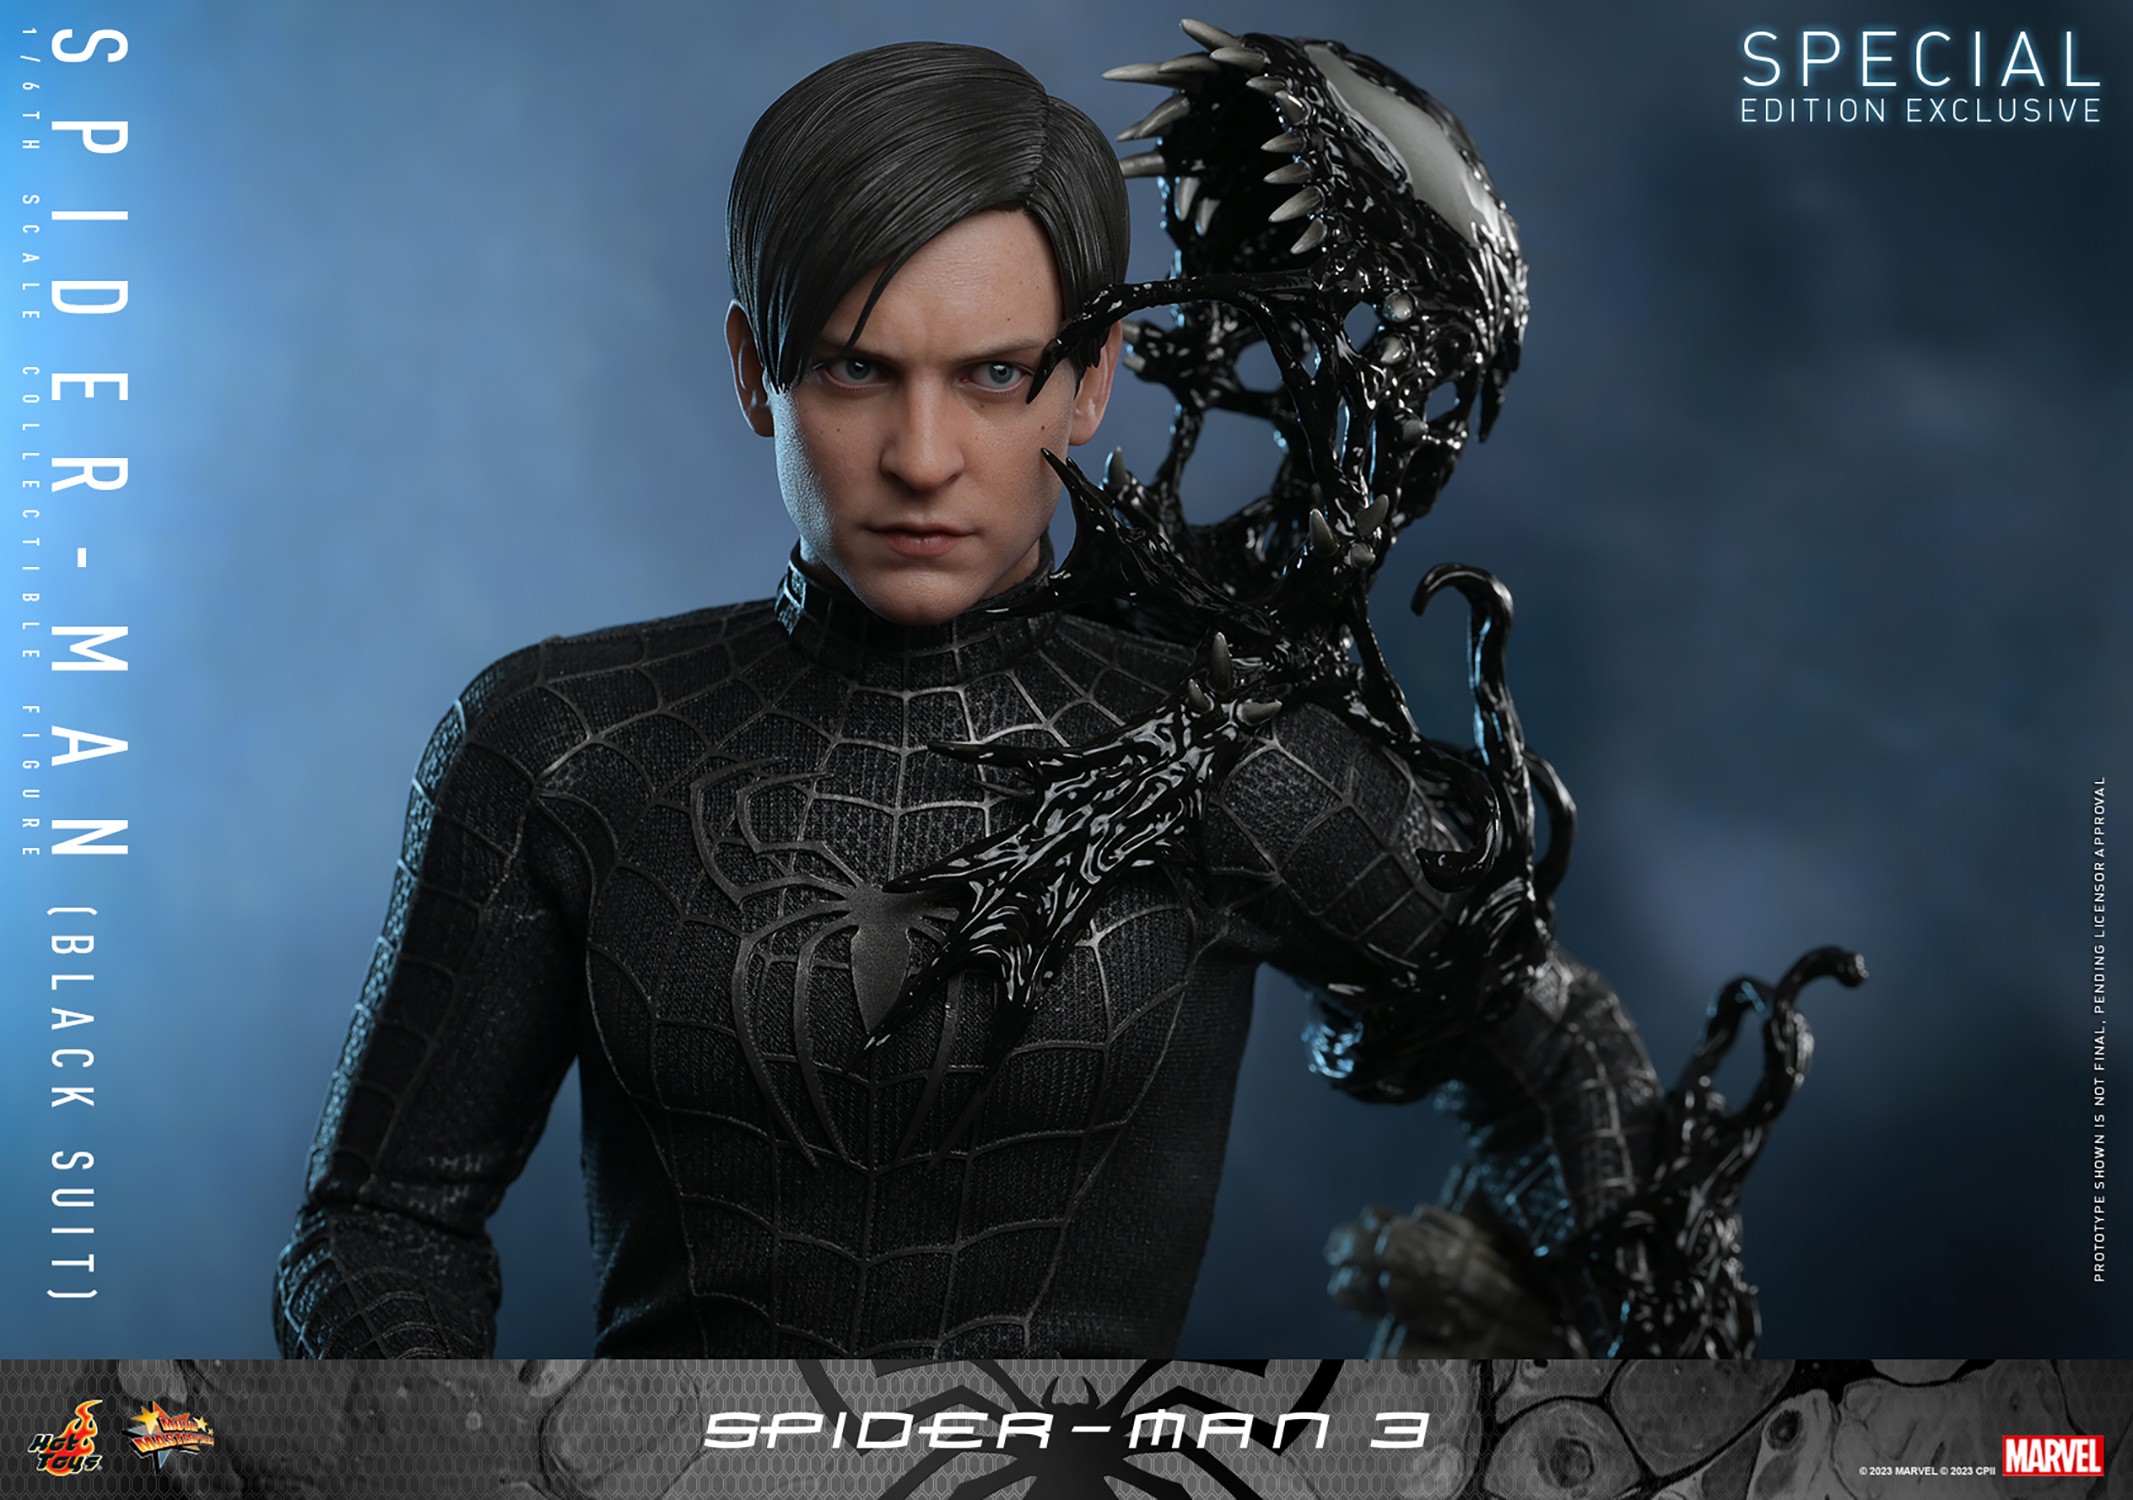 Spider-Man (Black Suit) (Special Edition) (Prototype Shown) View 5